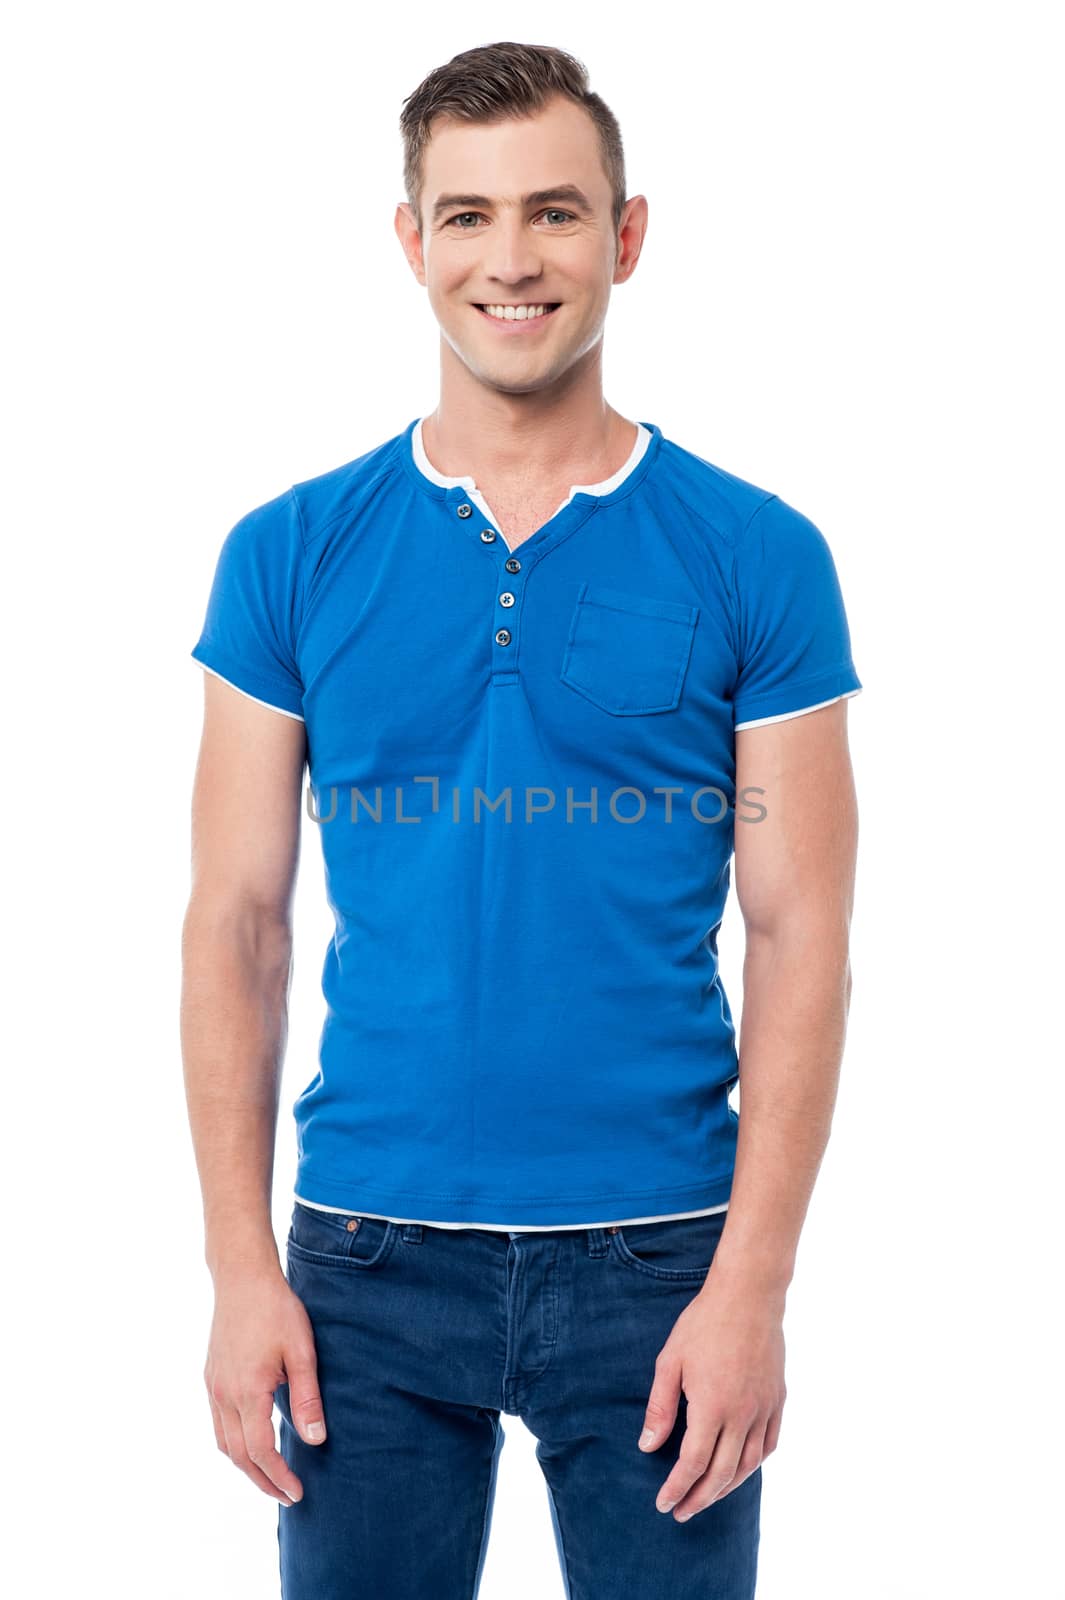 Smiling man posing casualy by stockyimages